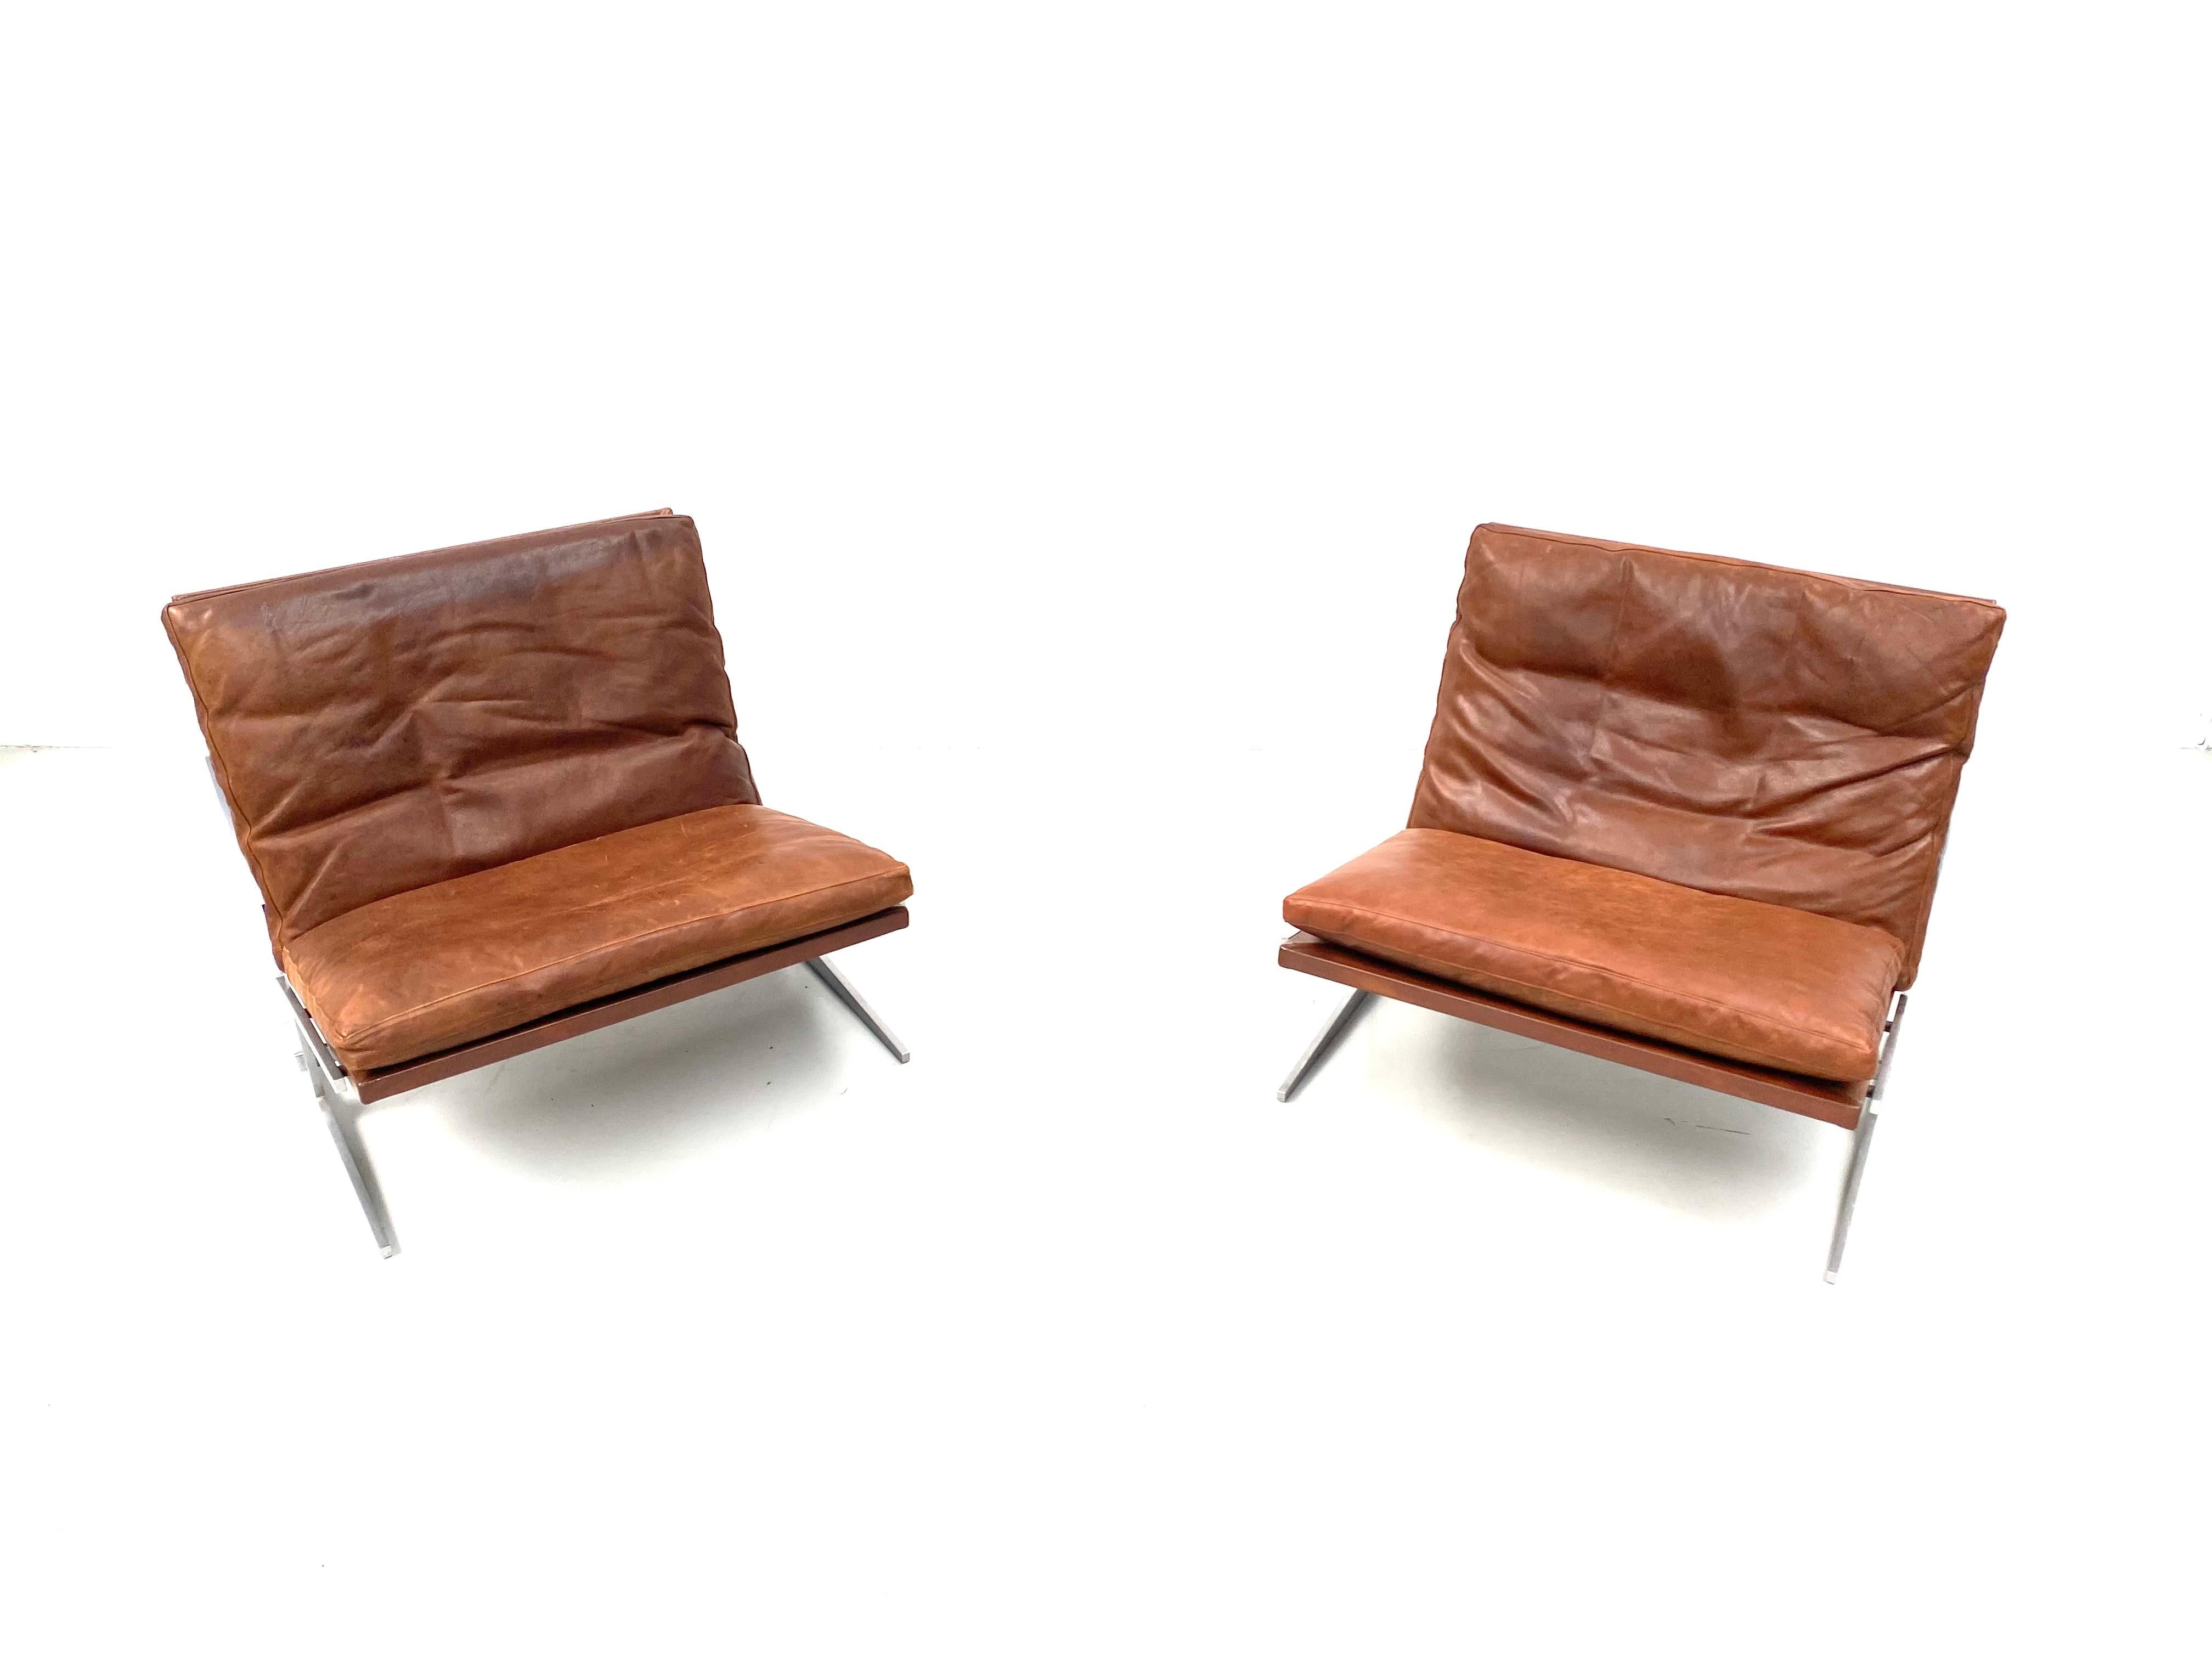 Scandinavian Modern Danish BO-561 Lounge Chairs in Cognac by Fabricius and Kastholm for BoEx, 1960s